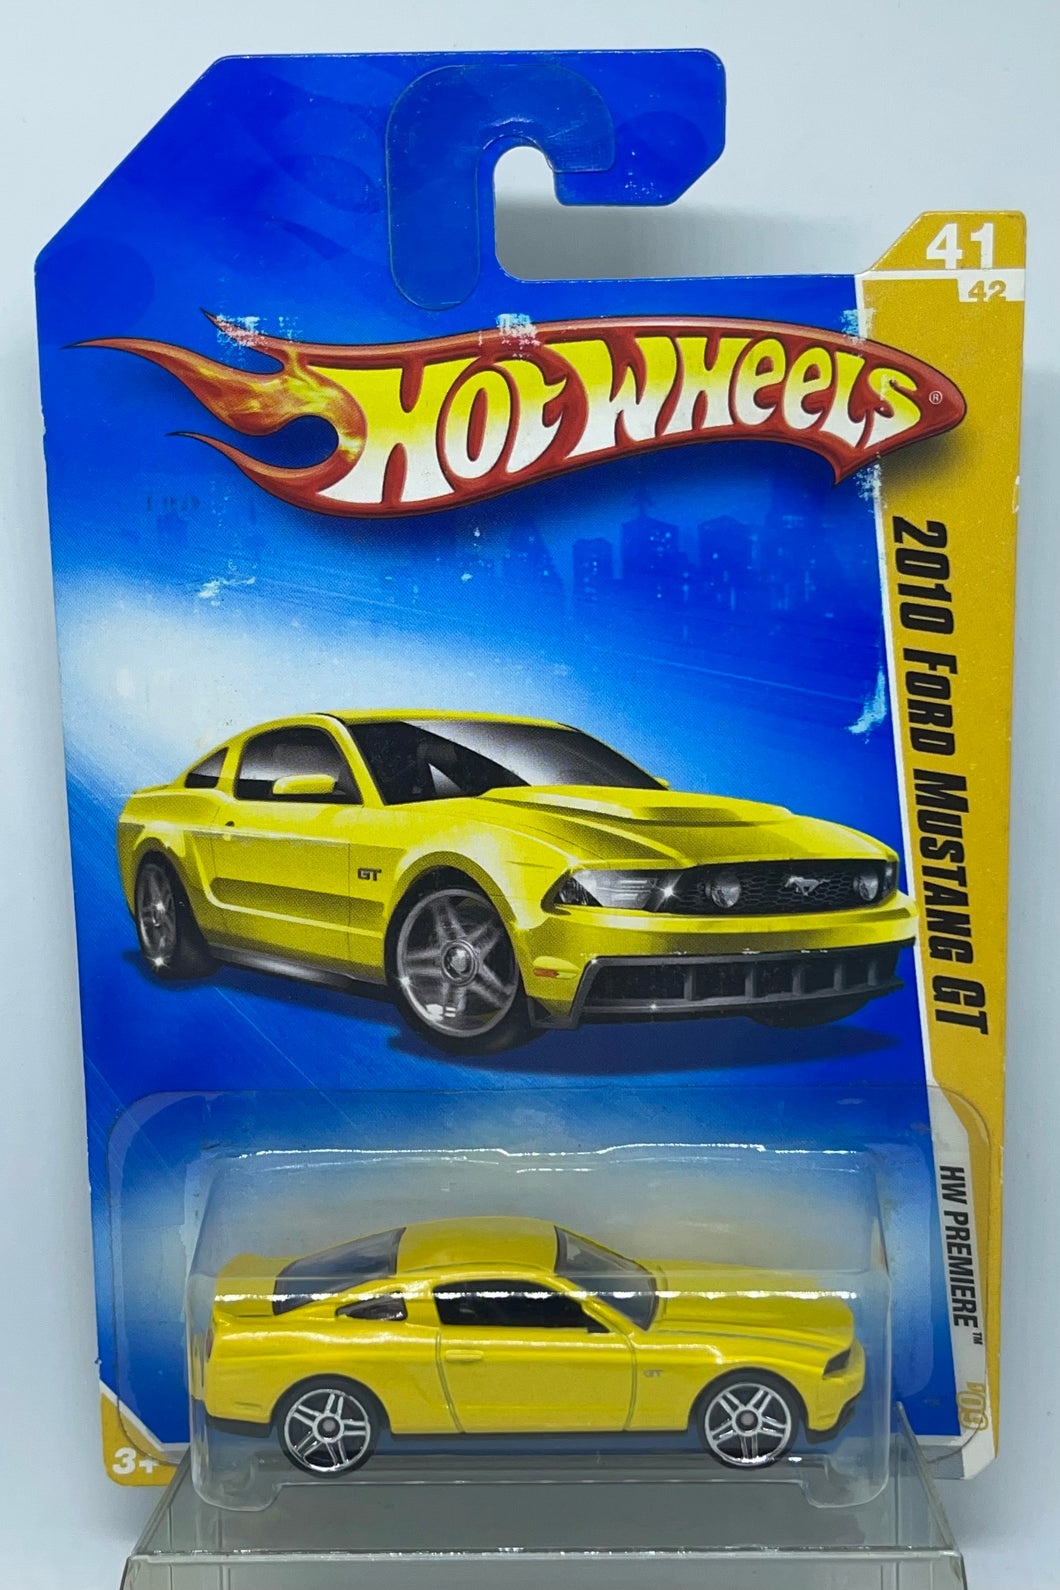 Hot wheels 2010 Ford Mustang GT Yellow